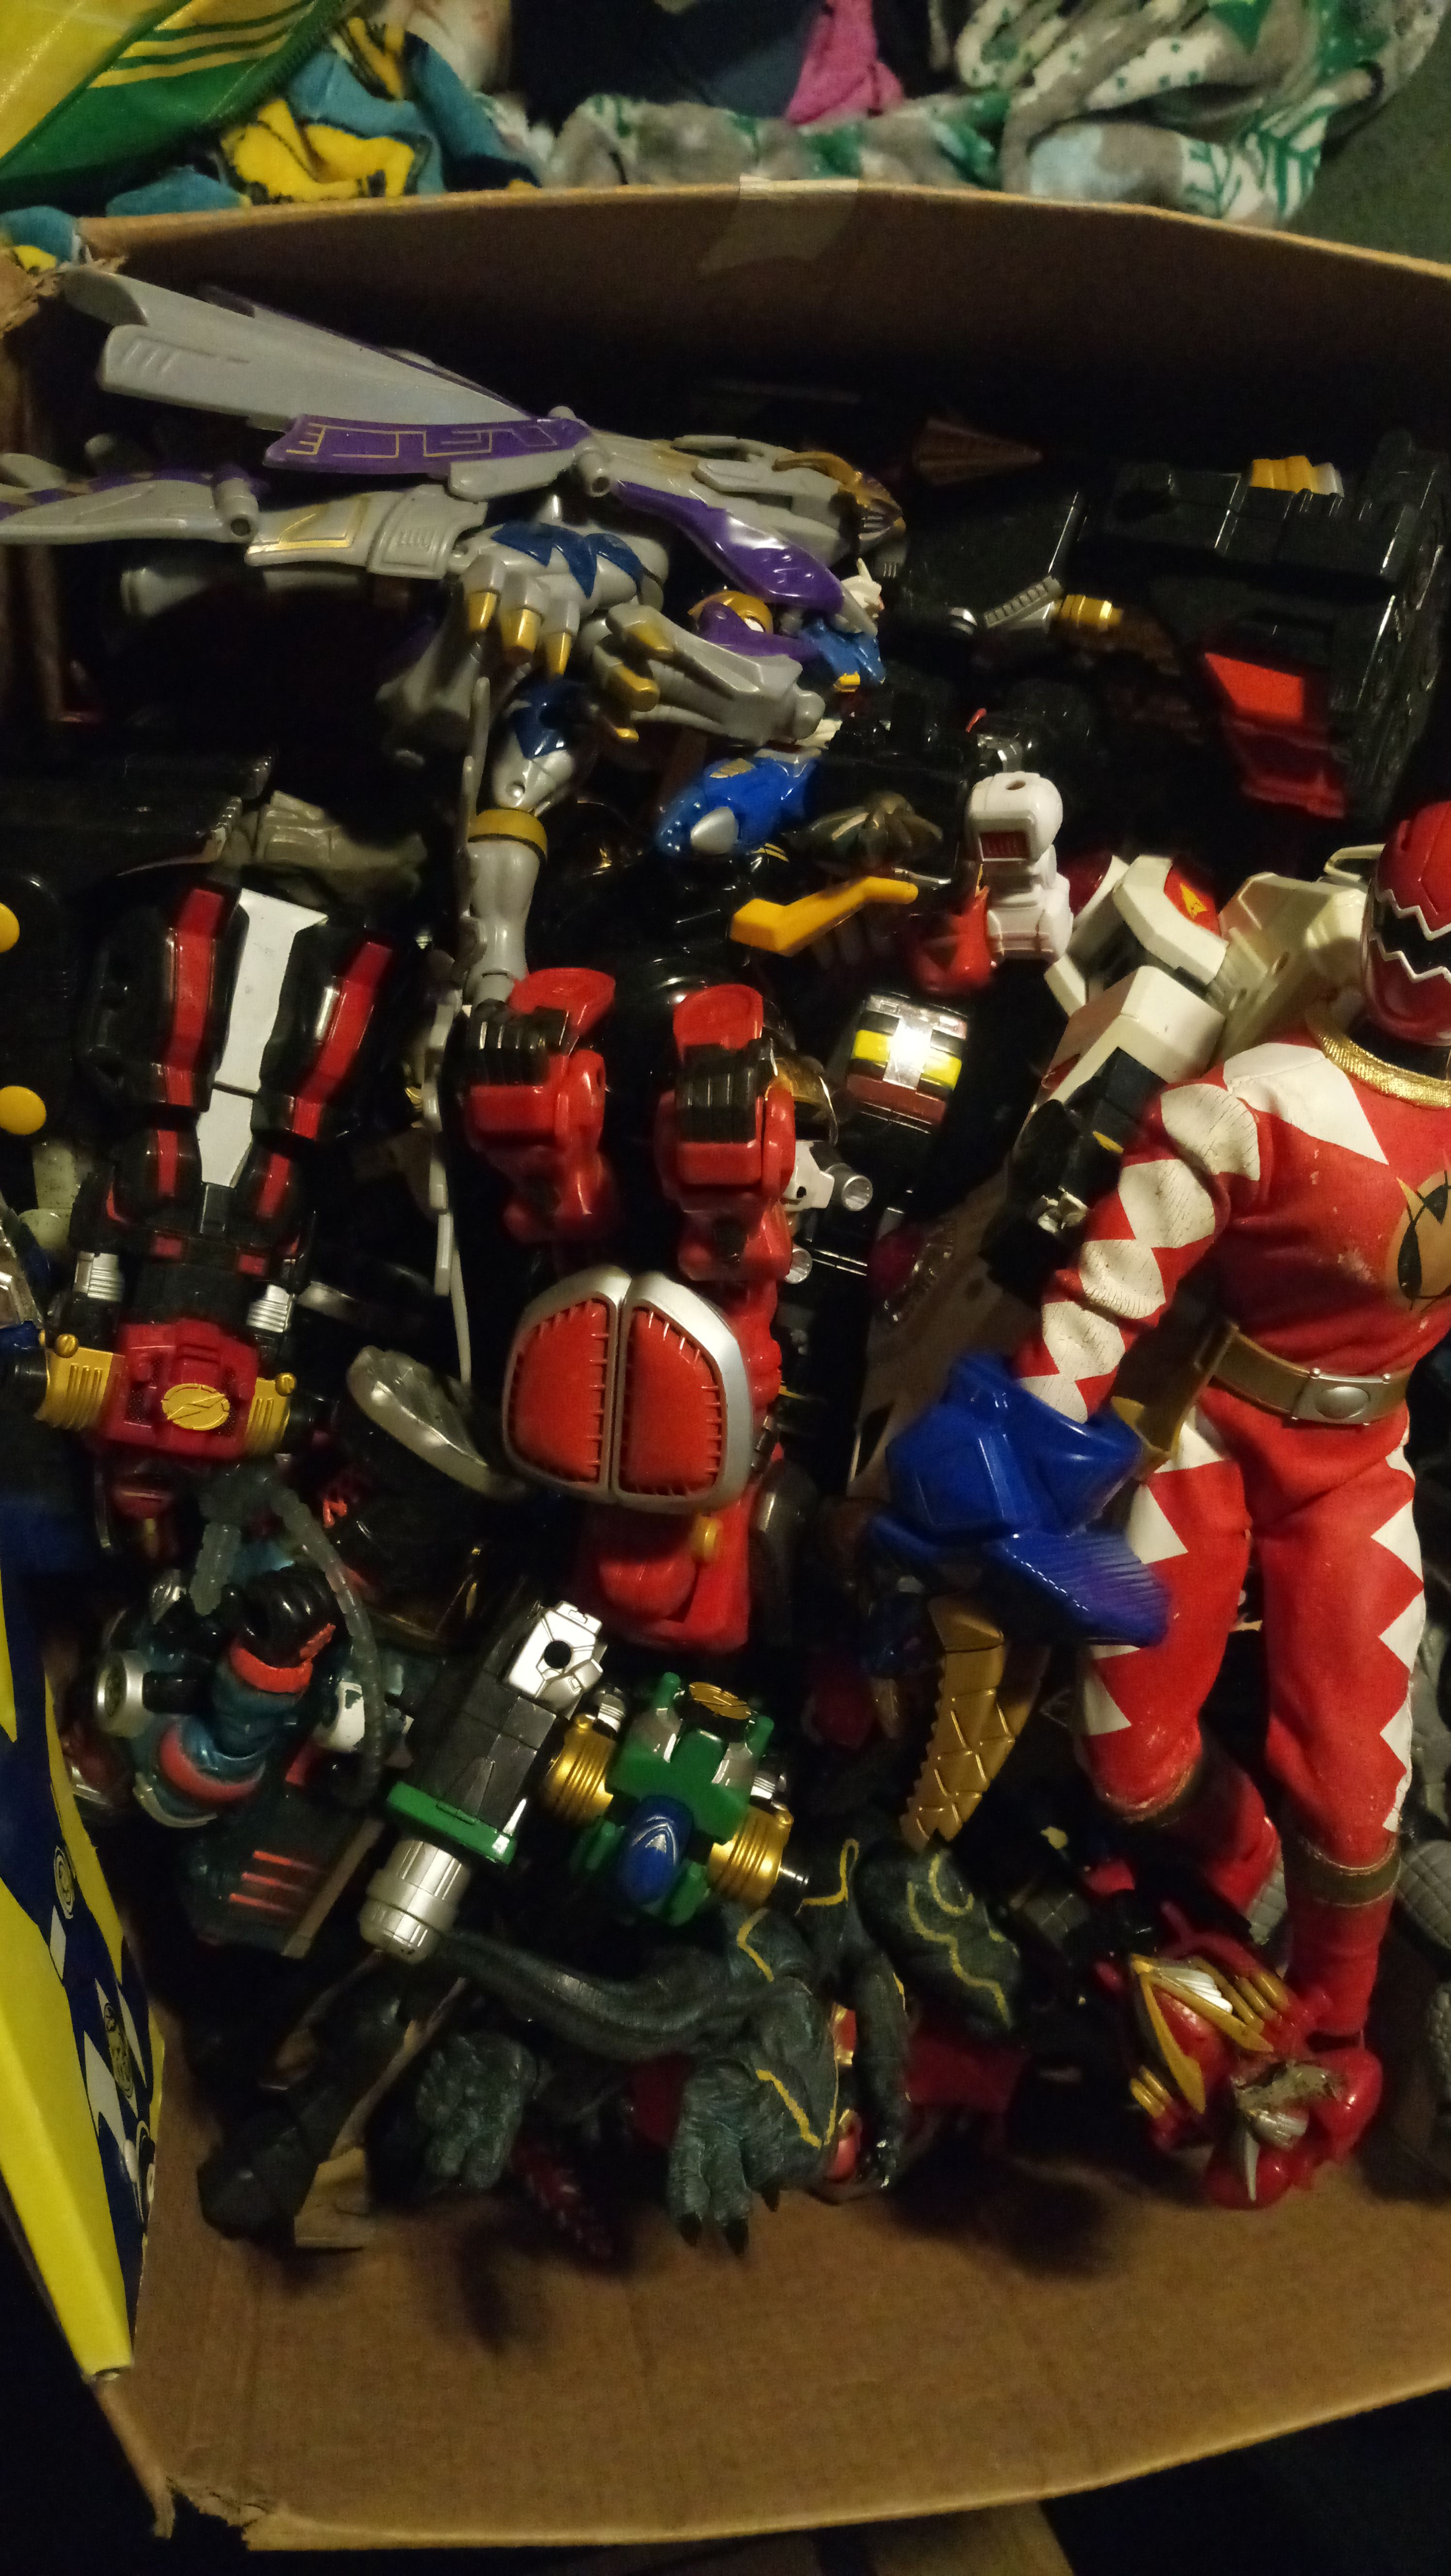 Mix toys of power rangers, transformers, monsters and Disney